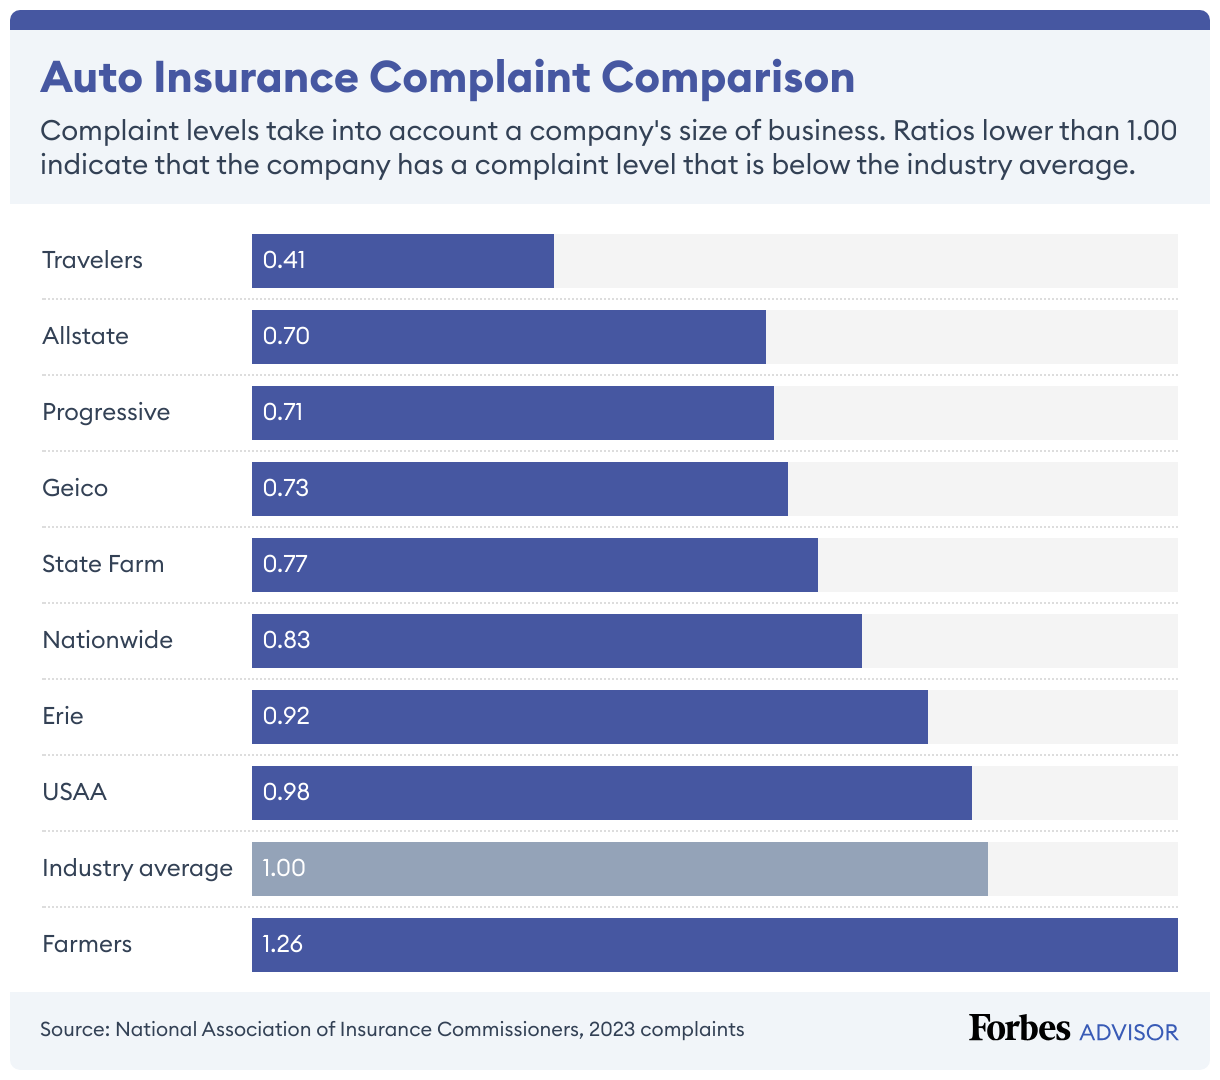 Geico has a lower level of auto insurance complaints than the industry average and is lower than many competitors, such as Erie, Nationwide and USAA.